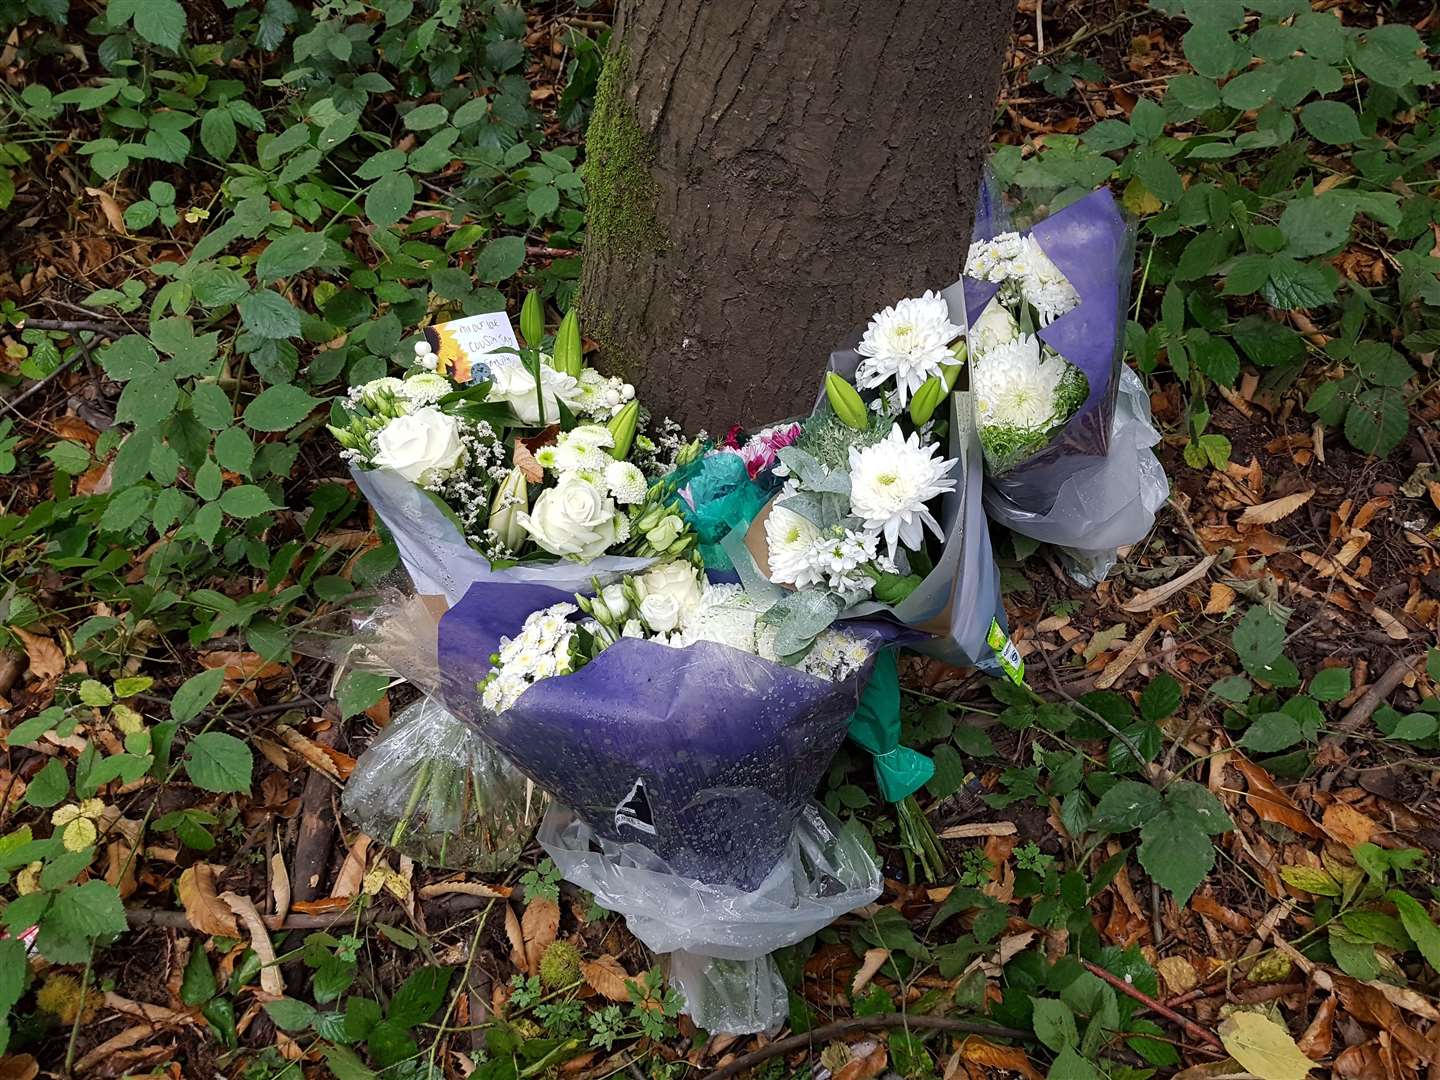 Floral tributes were left at the scene of a crash which took the life of Paul Hooker